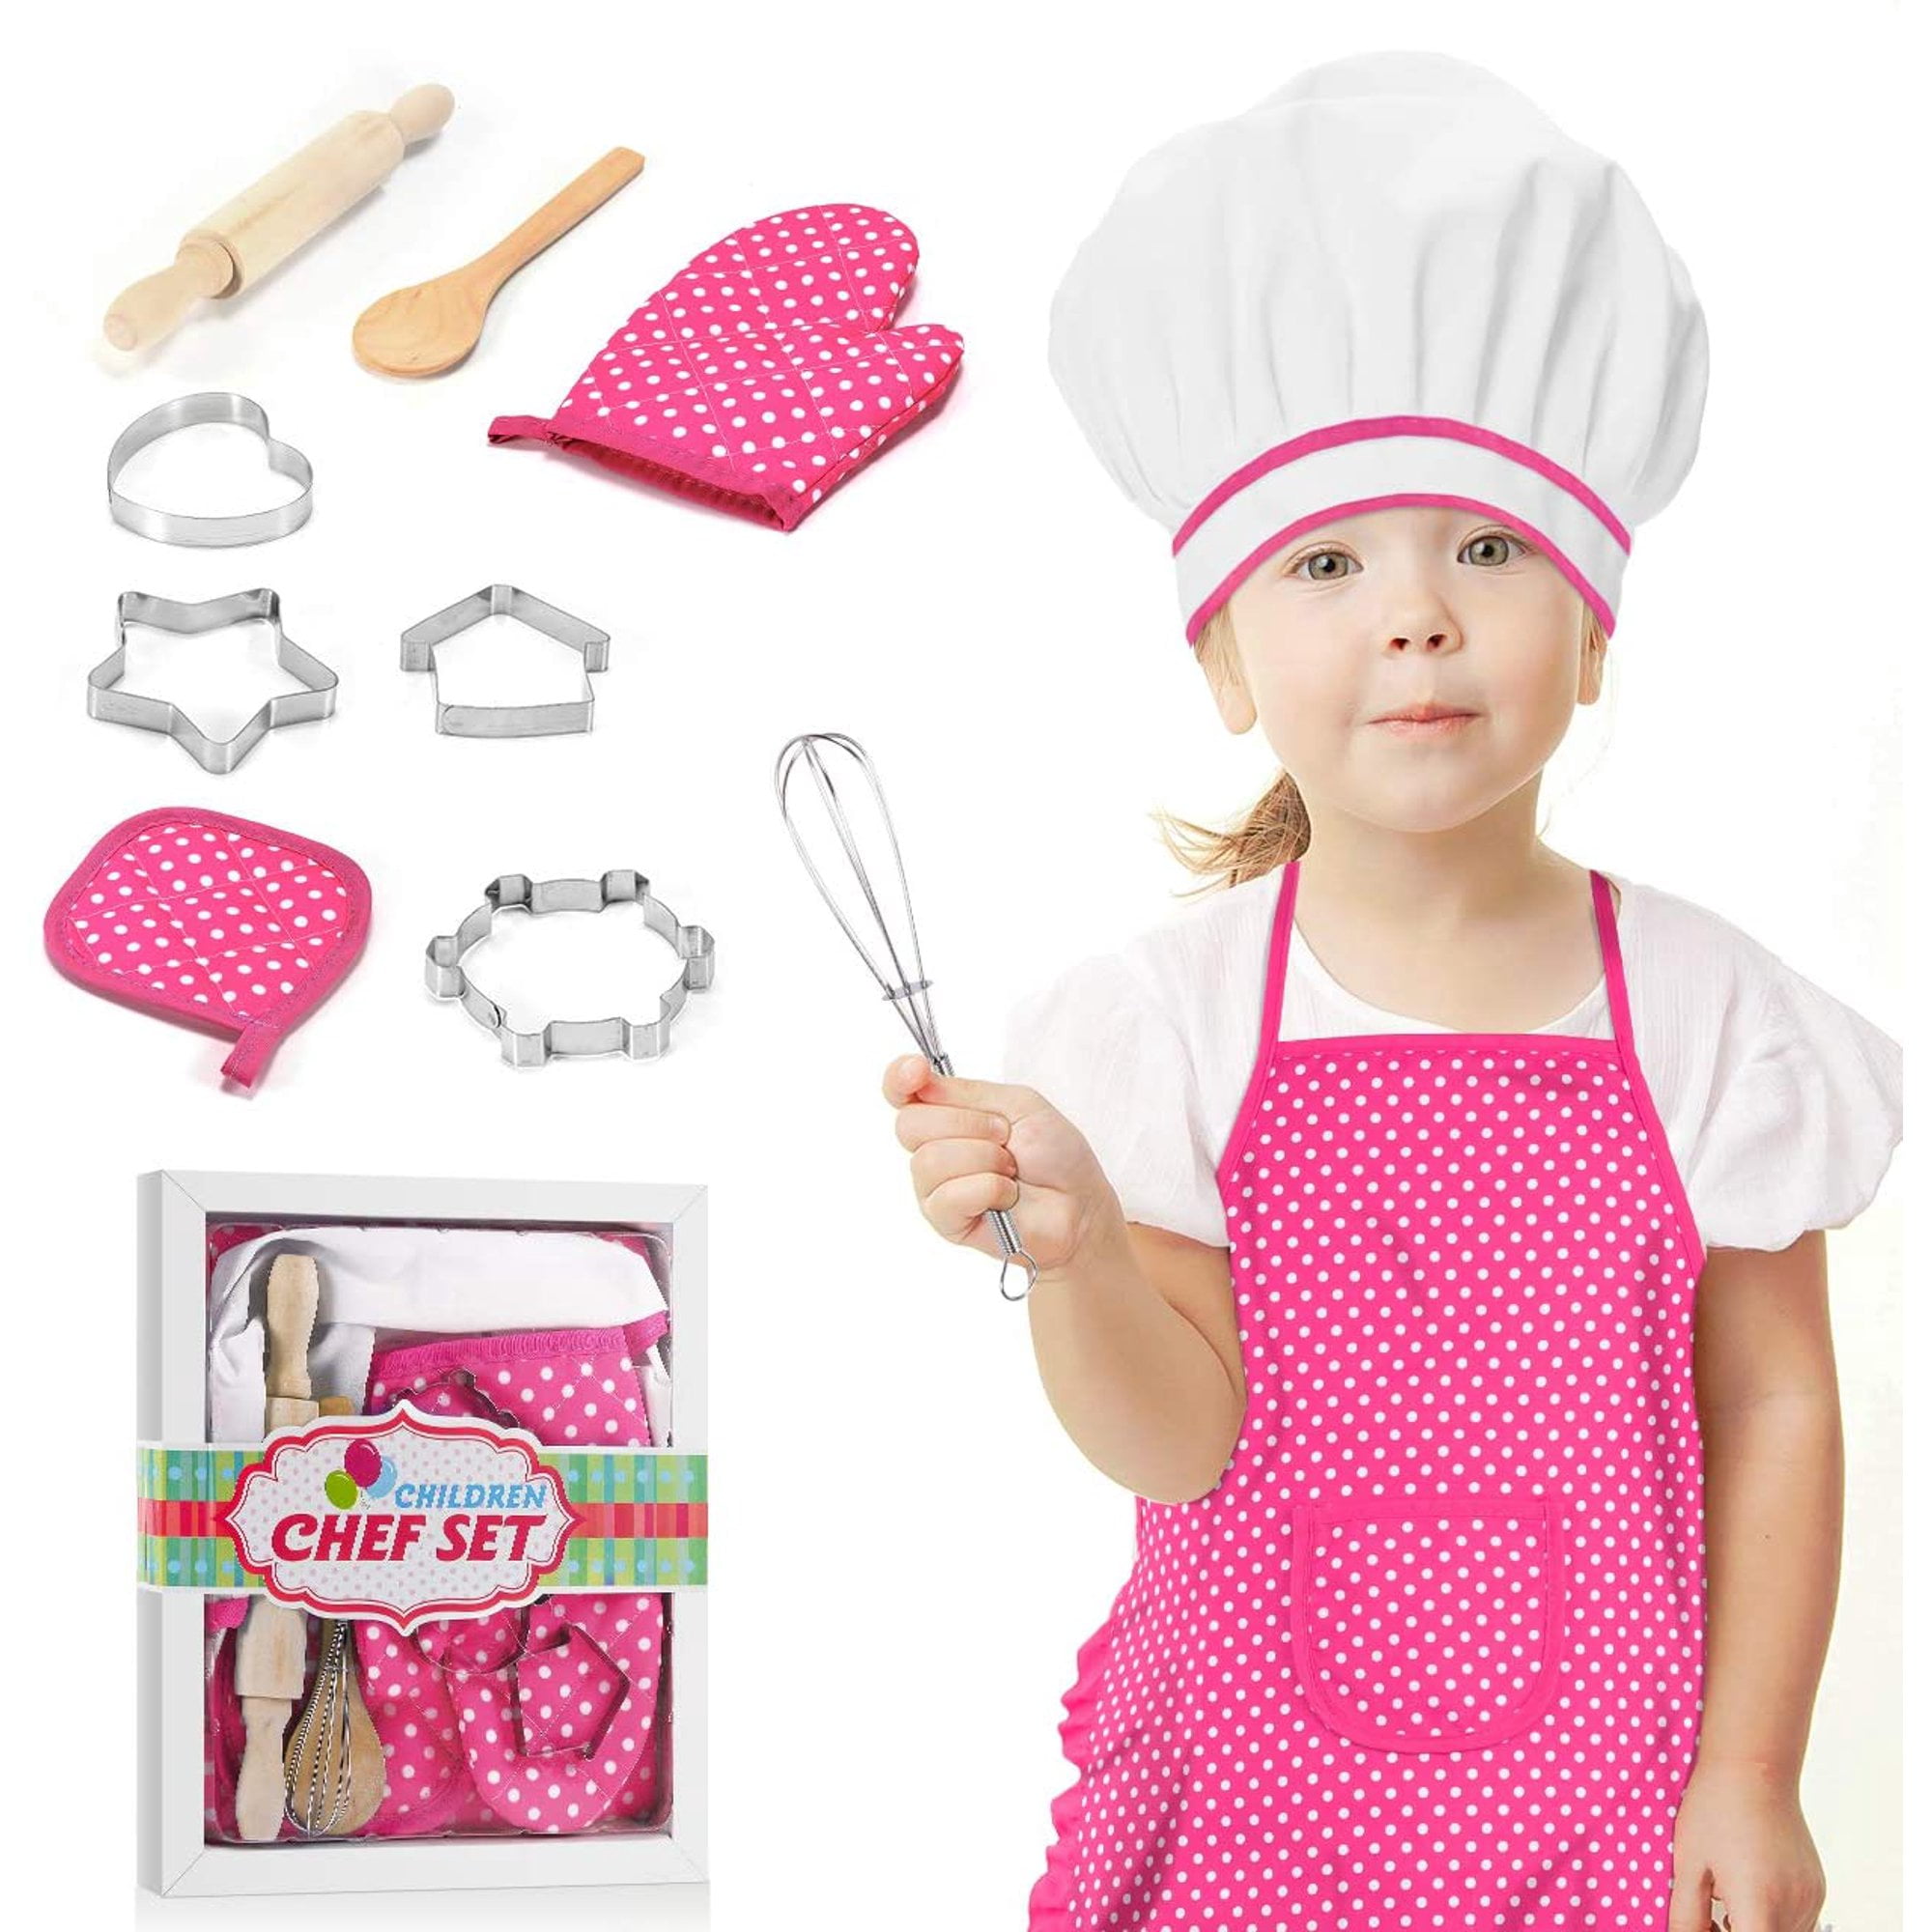 With Apron Chef Hat Accessories For Toddler Career Role Play Childrens Baking Toy ckground Mini baking set Role Play Kitchen Toy Chef Cooking Play Set 11 pcs/S For Kids Children Girls